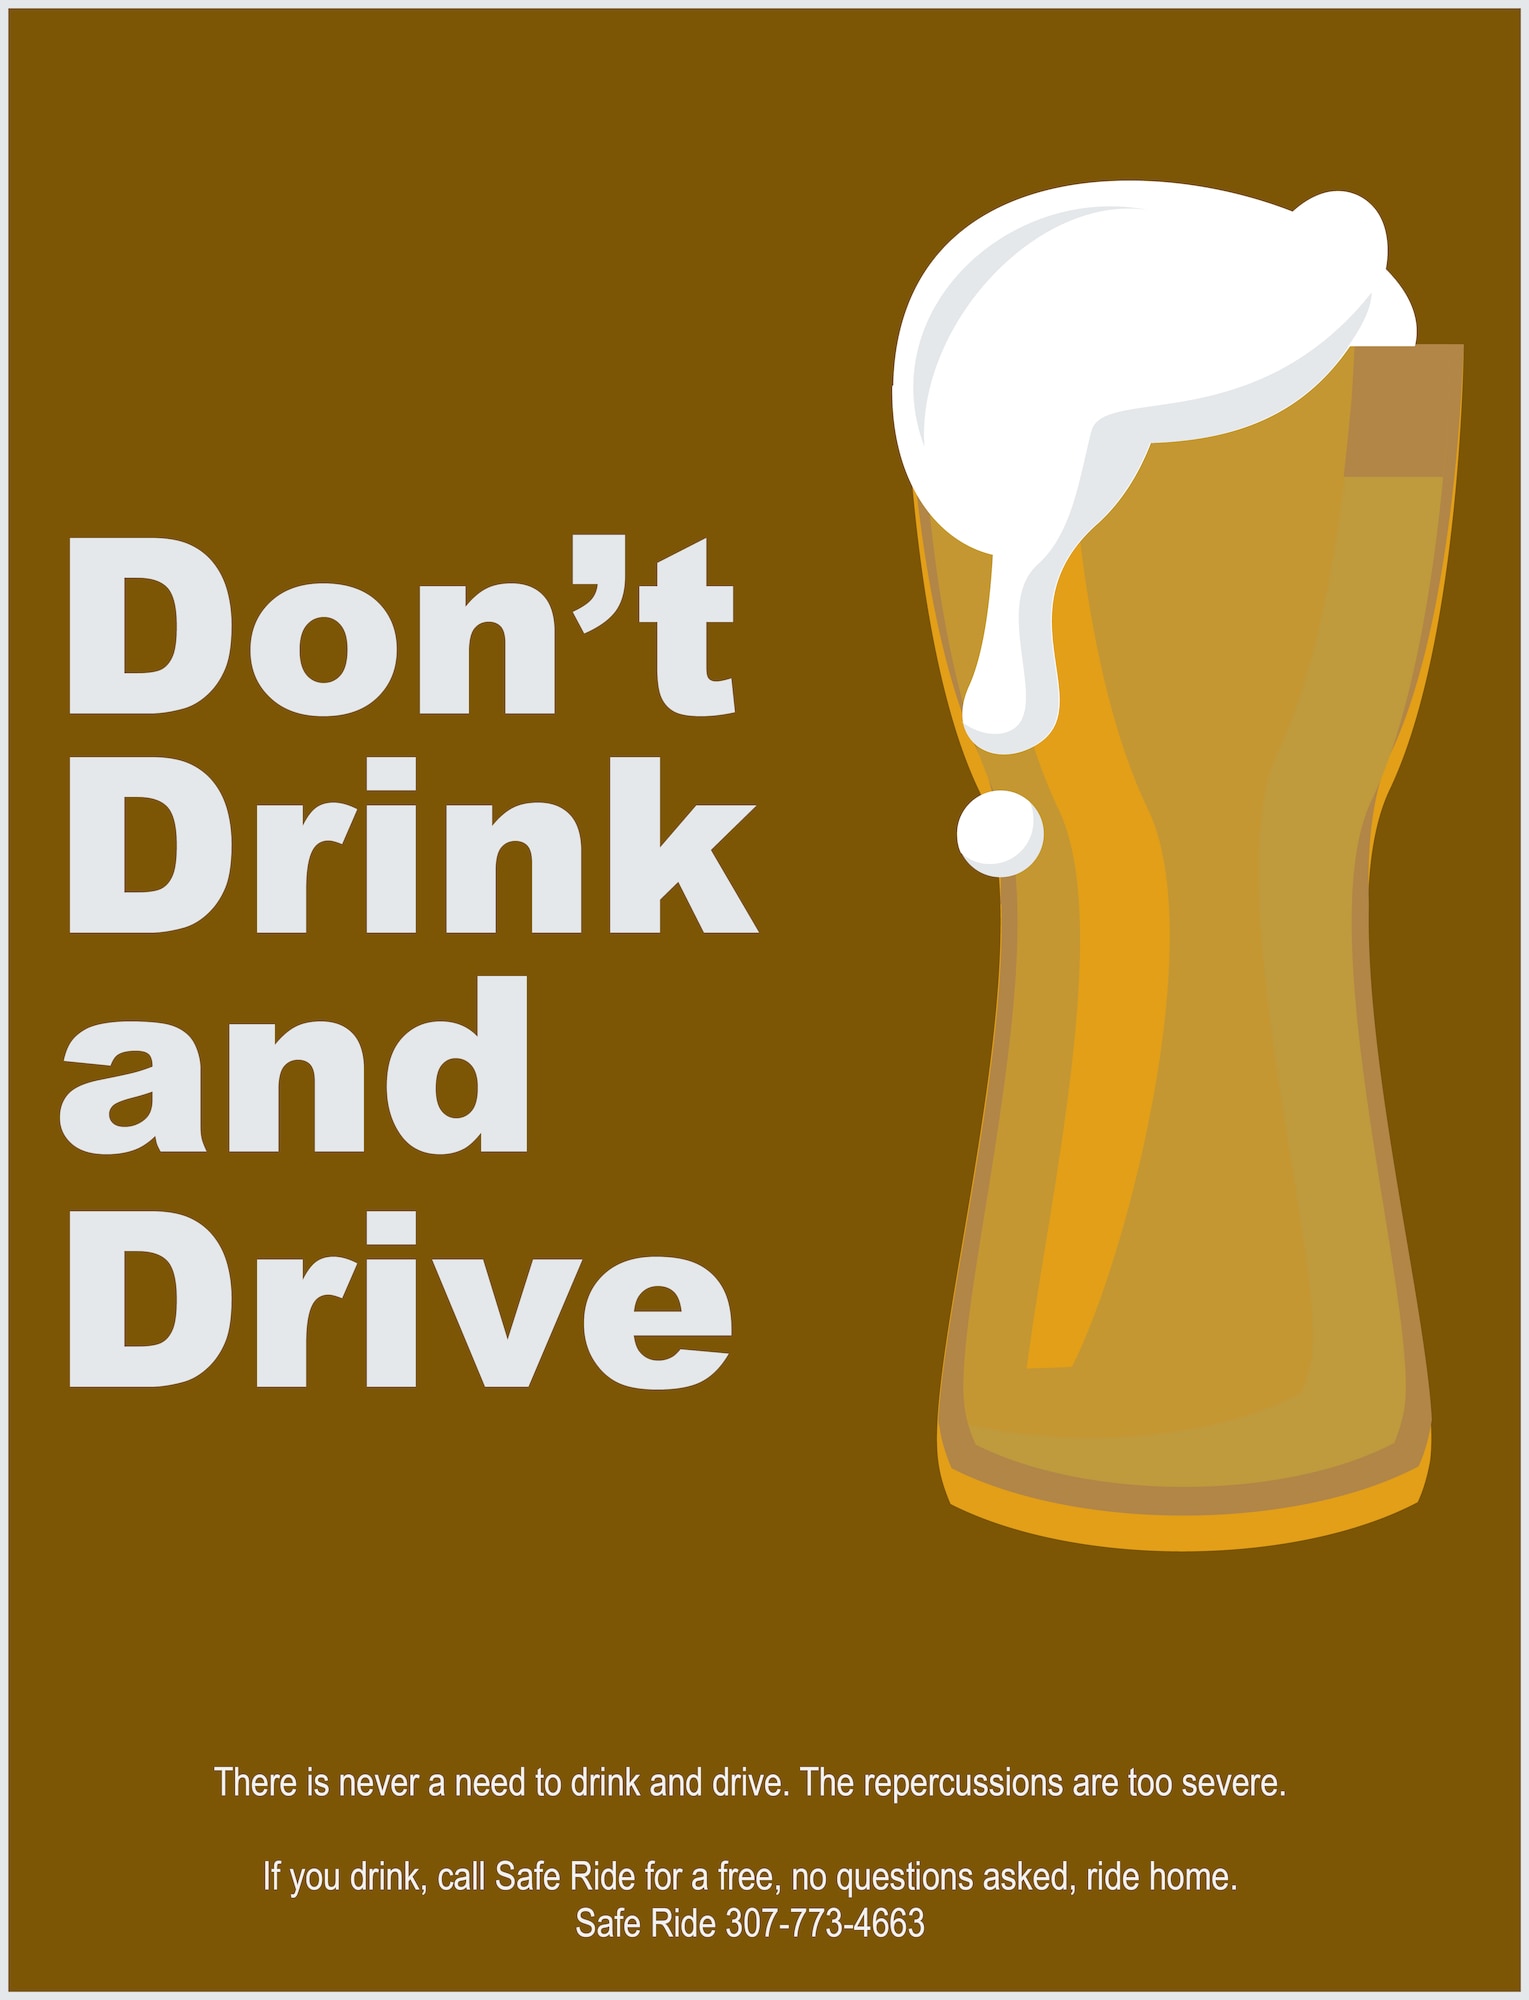 The drunk driving graphic is part of a larger driving safety campaign Sept. 16, 2019, on F.E. Warren Air Force Base, Wyo., to raise awareness of good driving practices and lower safety concerns on base. (U.S. Air Force graphic by Senior Airman Abbigayle Williams)